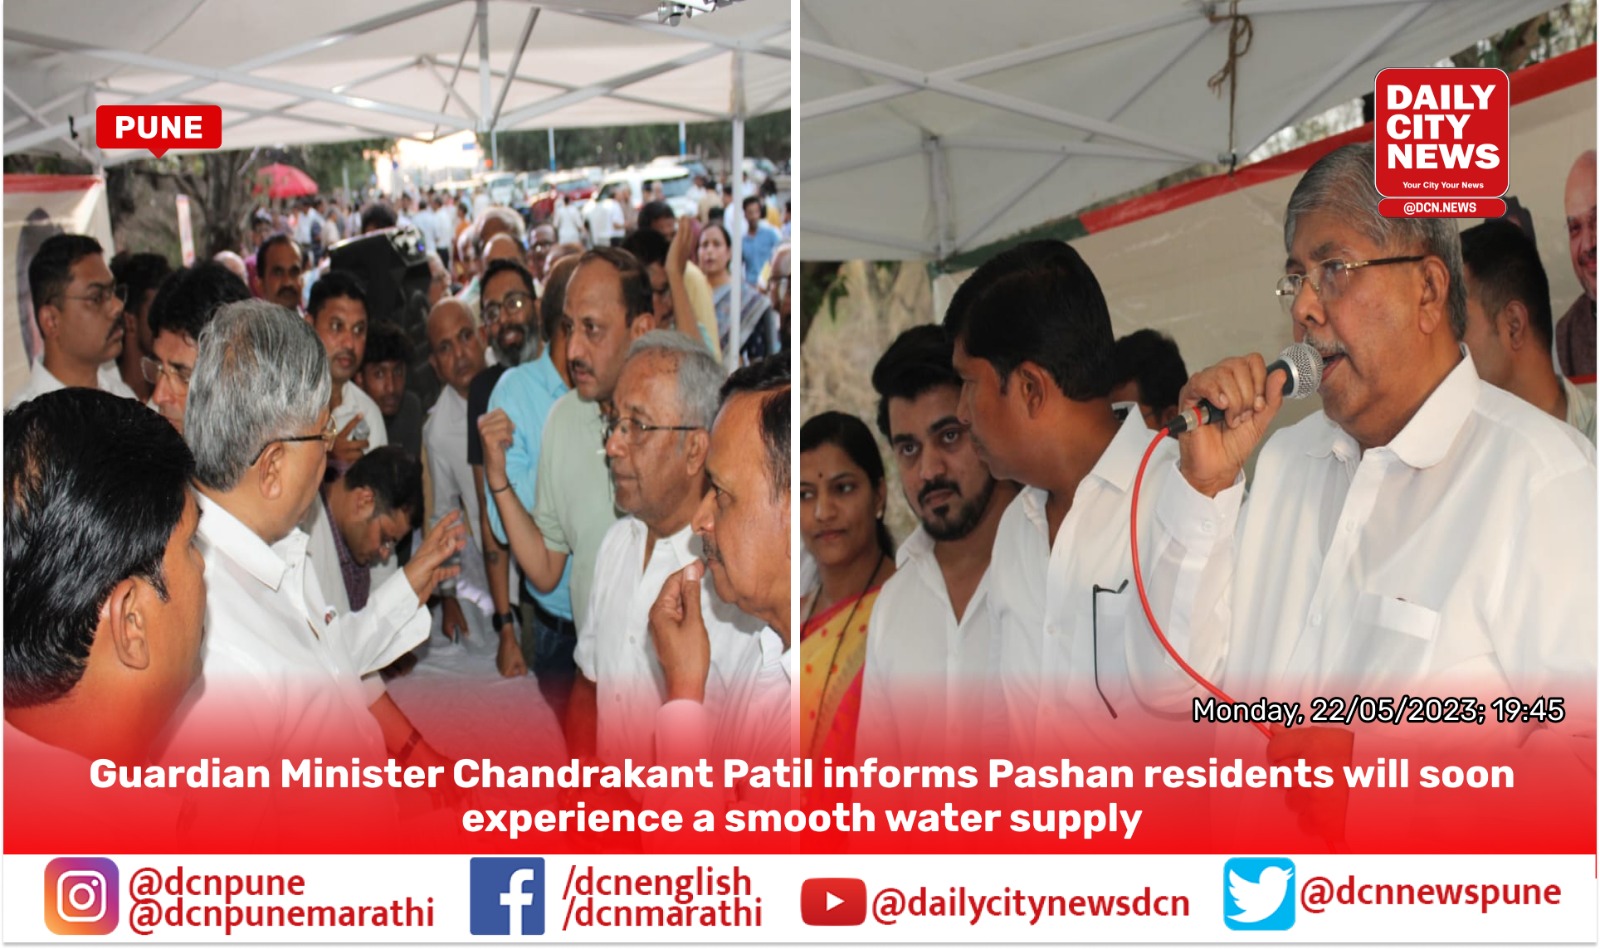 Guardian Minister Chandrakant Patil informs Pashan residents will soon experience a smooth water supply